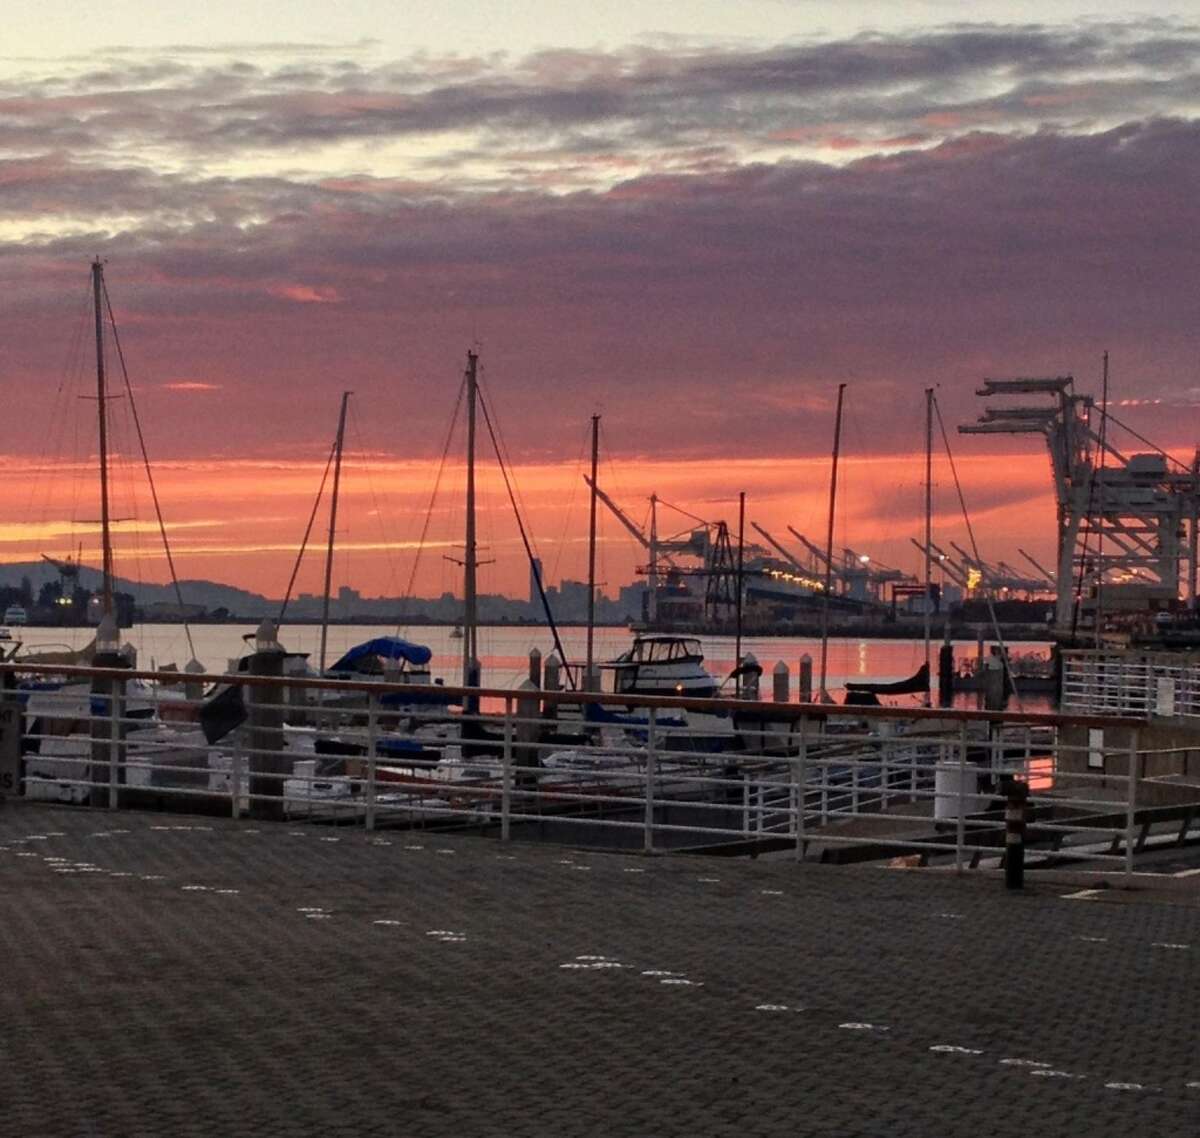 A view of the Jack London Square waterfront from Scott's Seafood Restaurant in Oakland. The restaurant's owner, Ray Gallagher, has been fined $395,000 by the San Francisco Bay Conservation and Development Commission for having erected the pavilion in which the luncheon was held.